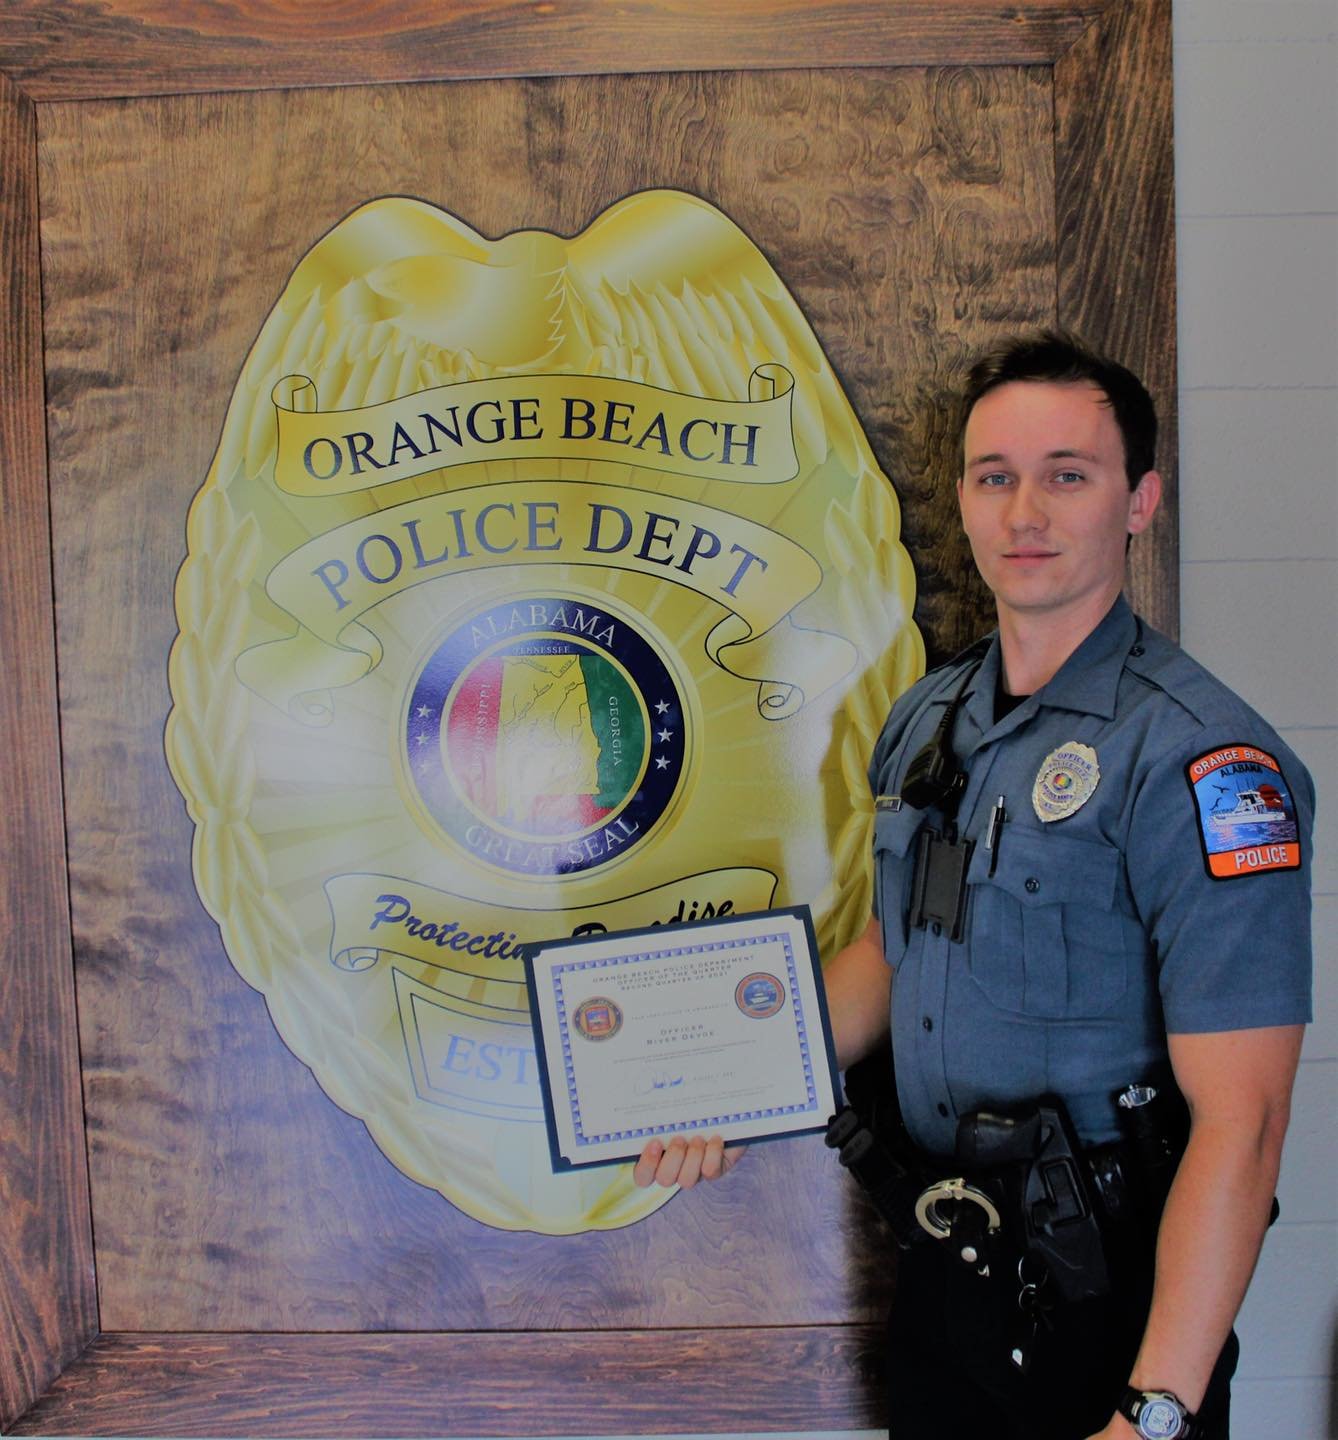 The Orange Beach Police Department recognized Officer River DeVoe as Officer of the second Quarter of 2021.